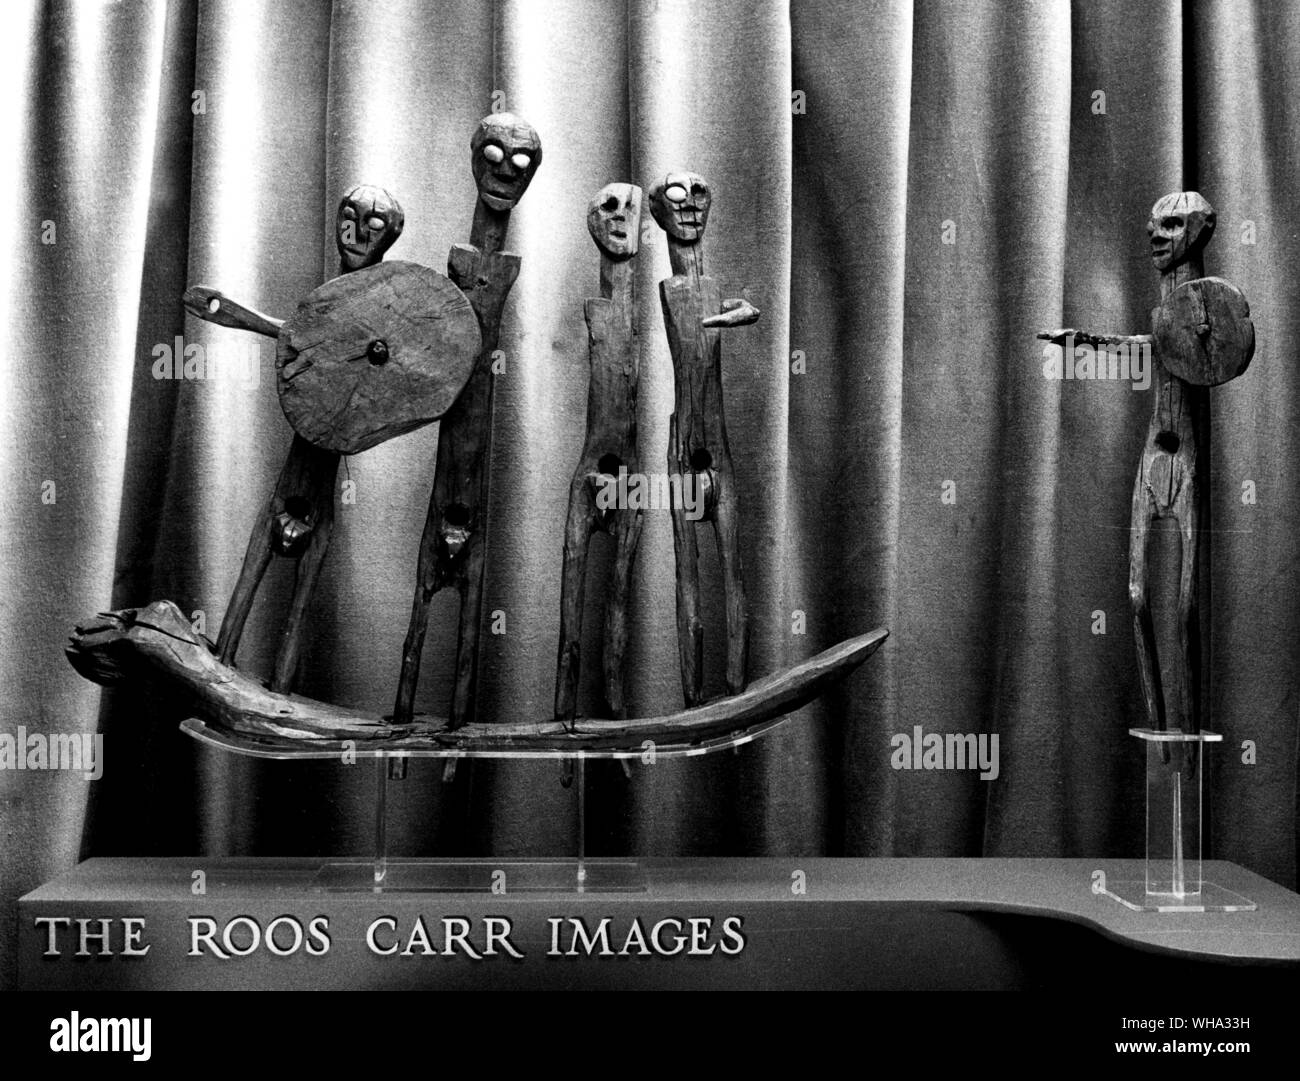 Early man: The Roos Carr Images (late Bronze Age). 1900 B.C - c. 500 B.C. Stock Photo